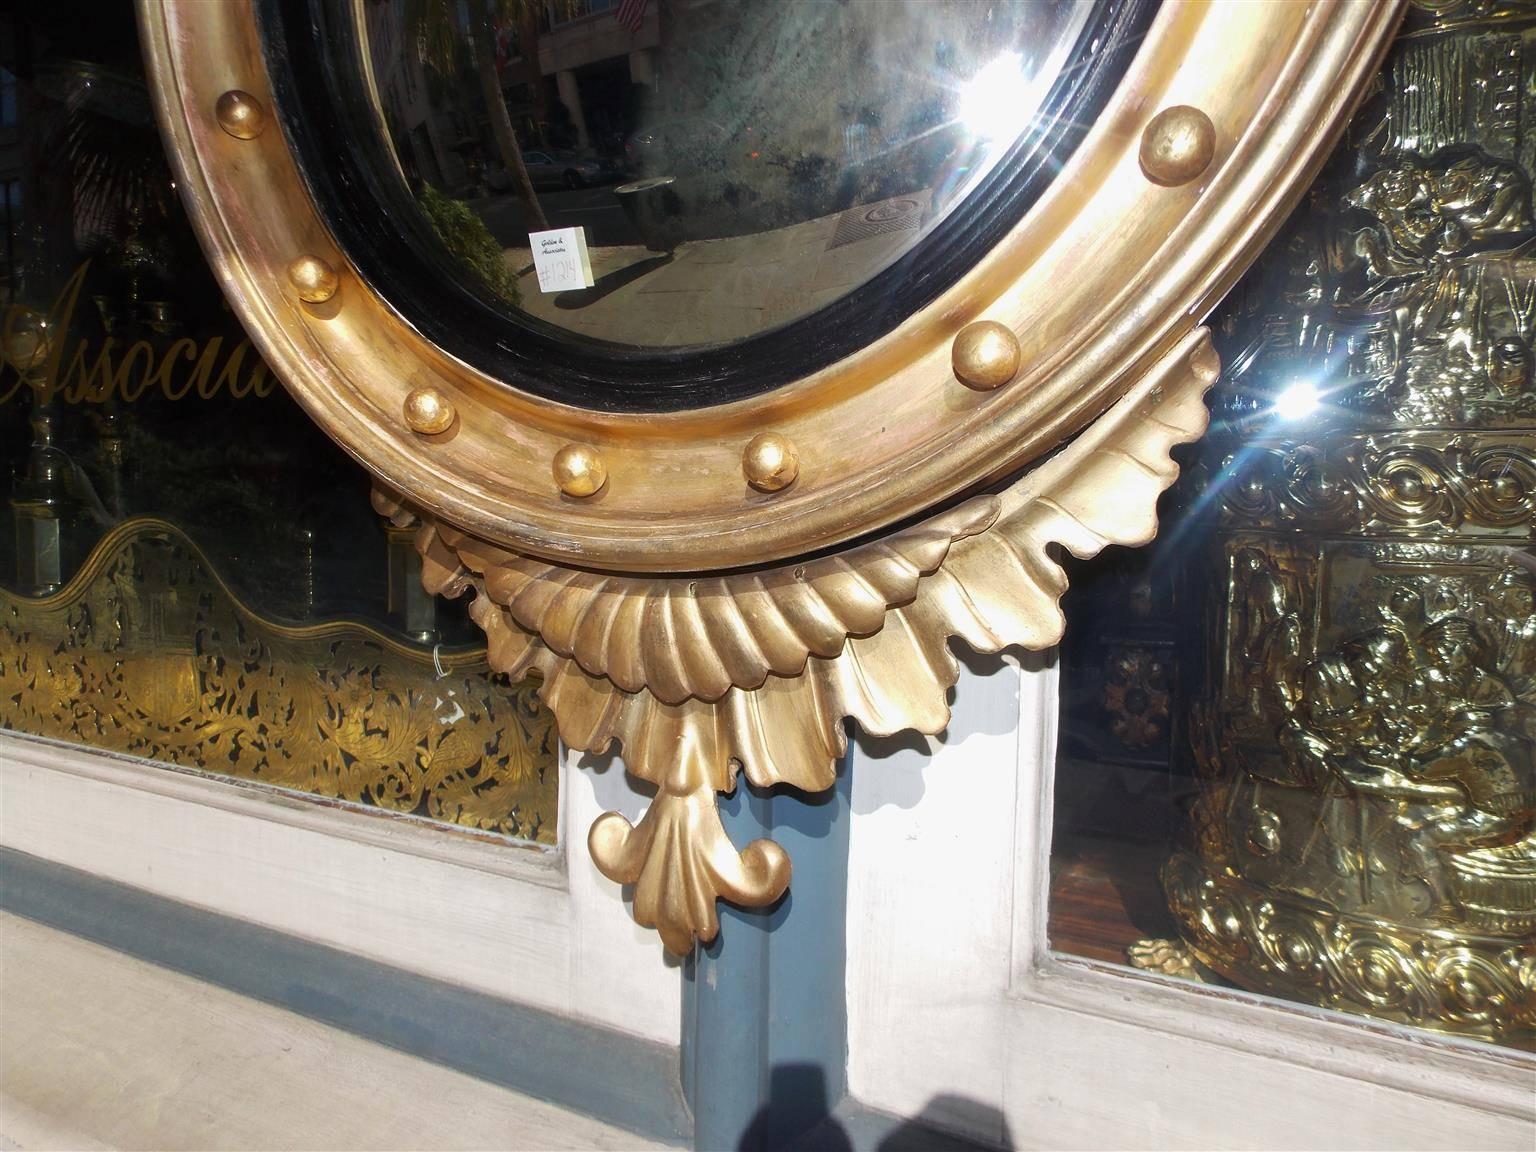 Early 19th Century American Federal Gilt Convex Mirror with Perched Eagle, Circa 1820